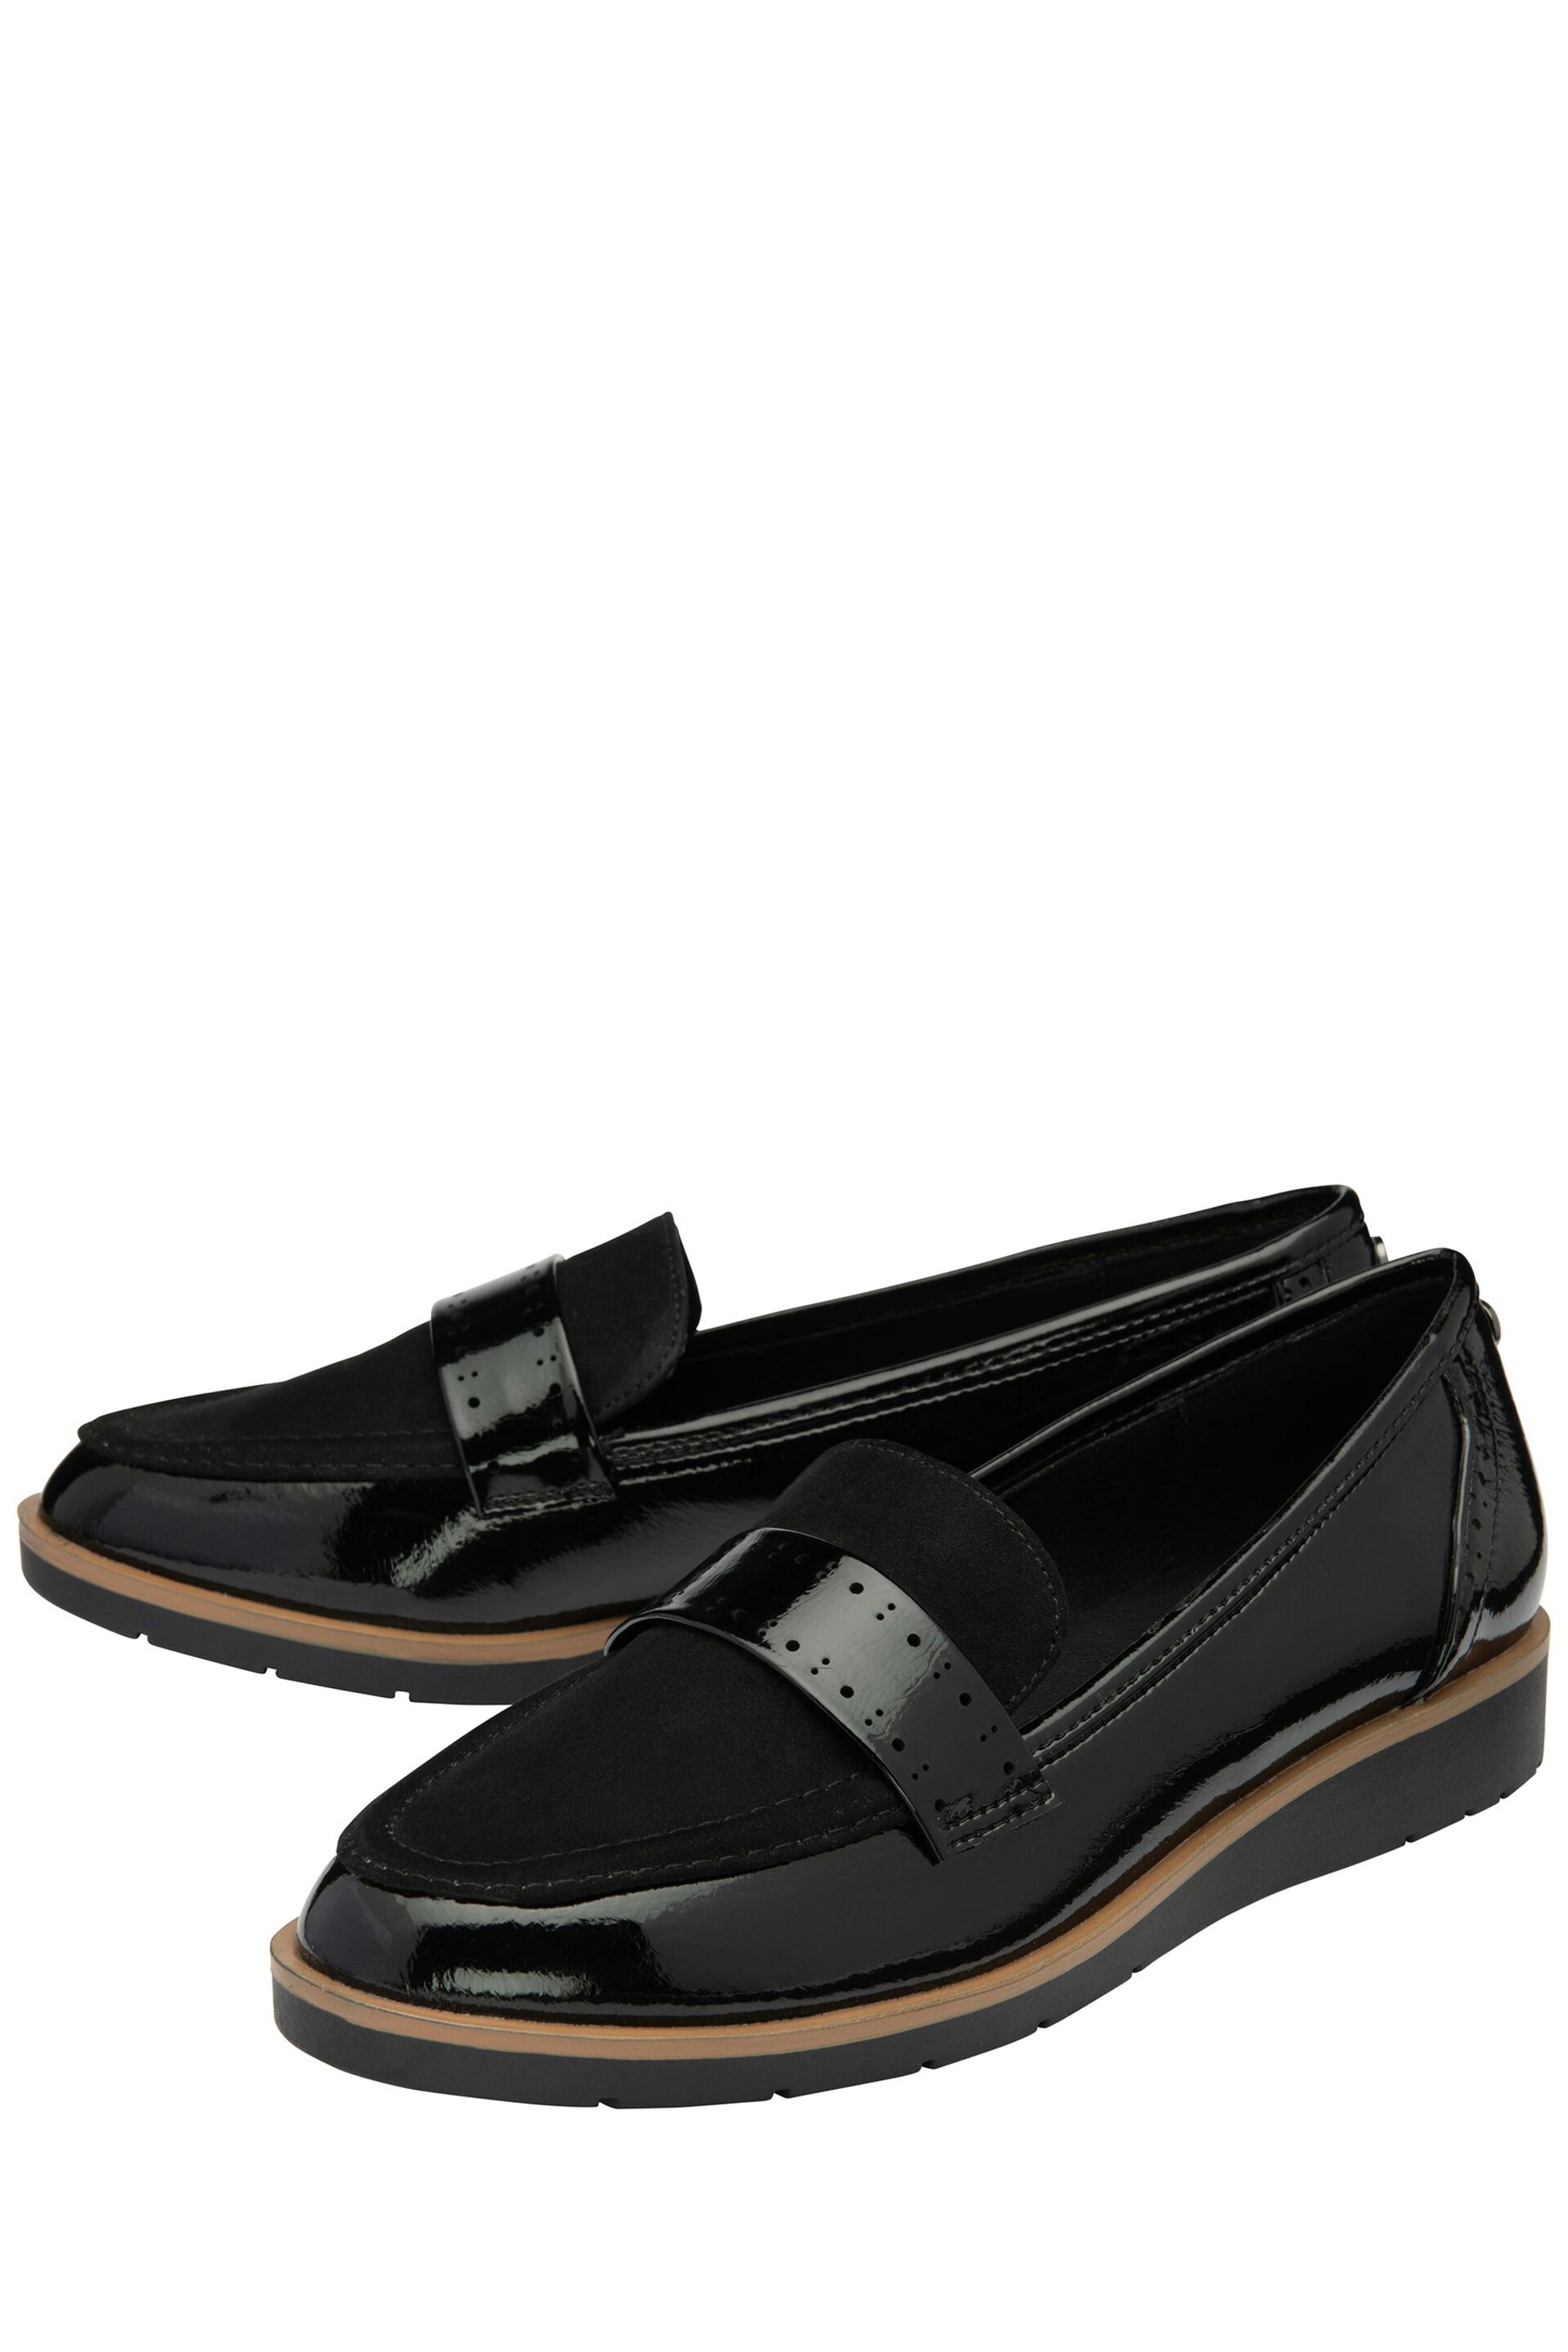 Lotus Black Patent Loafers - Image 2 of 4